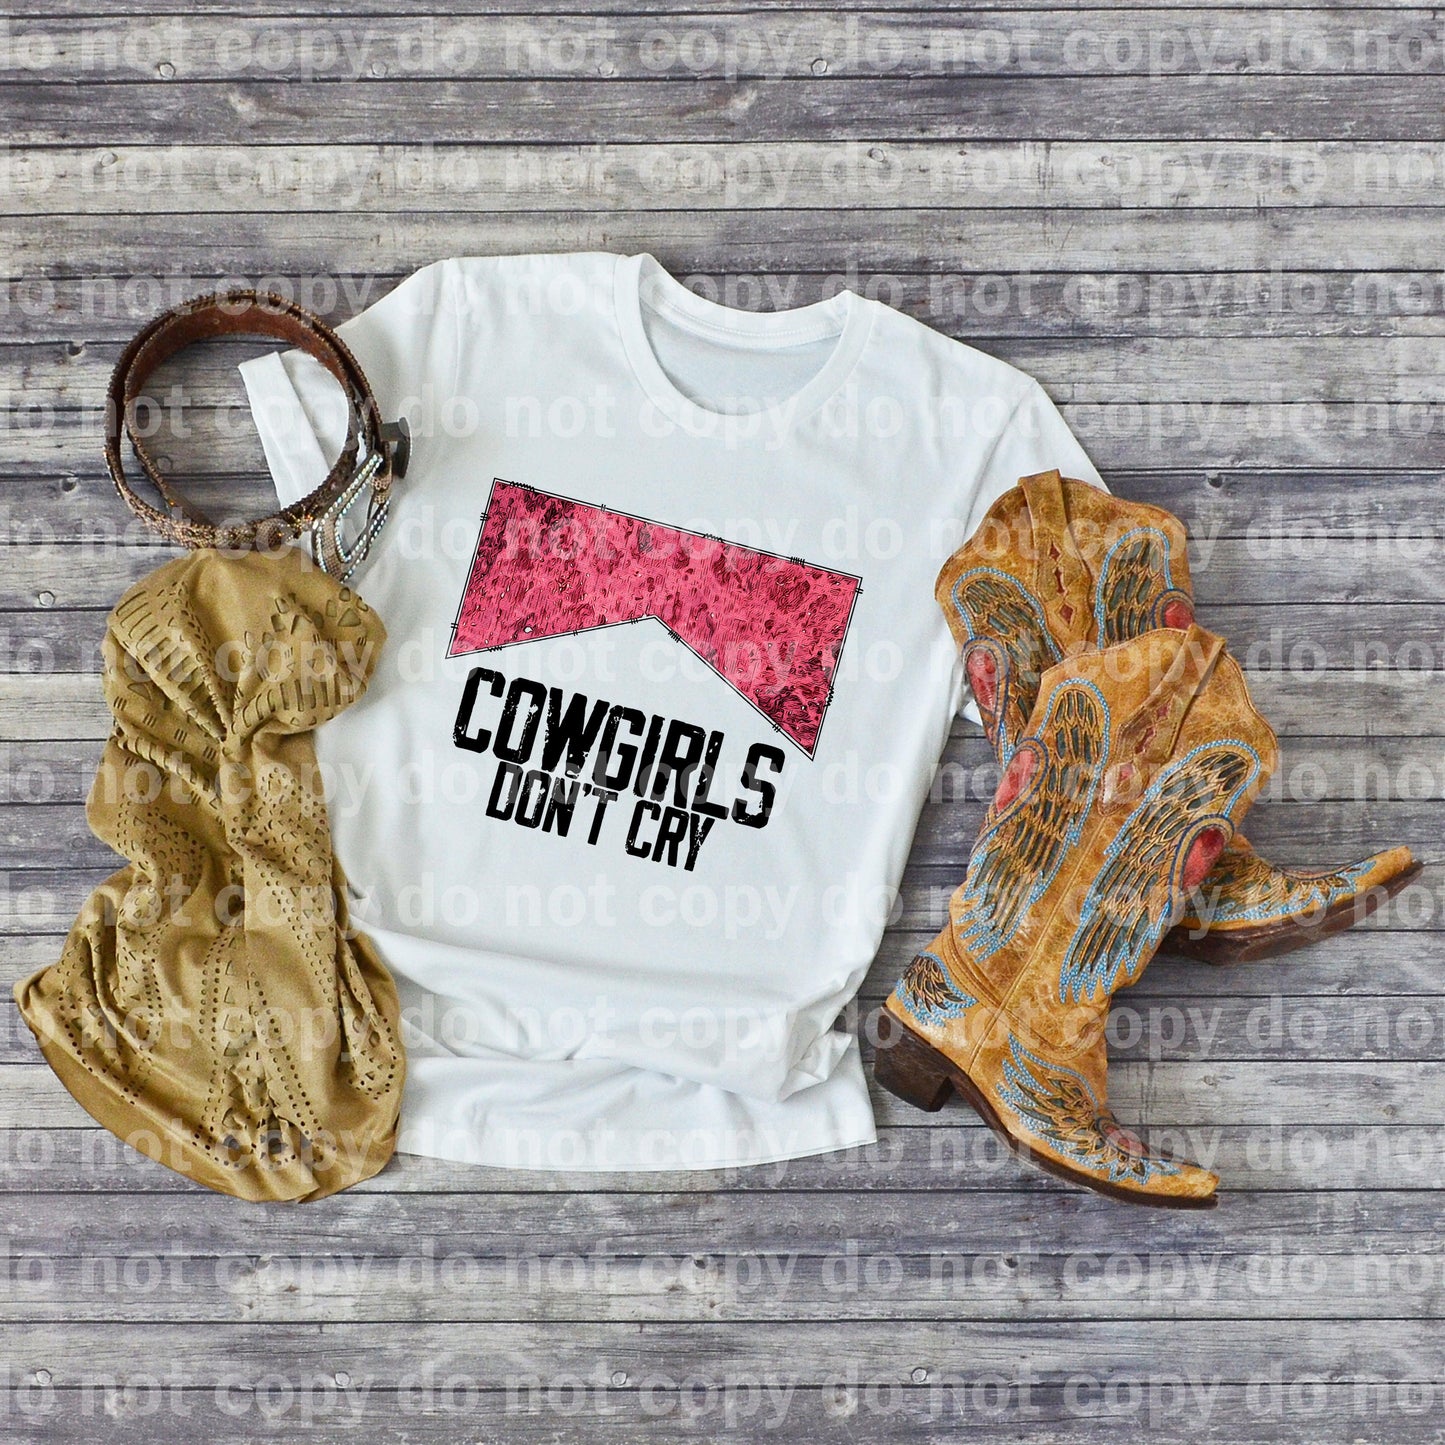 Cowgirls don't cry Sublimation print